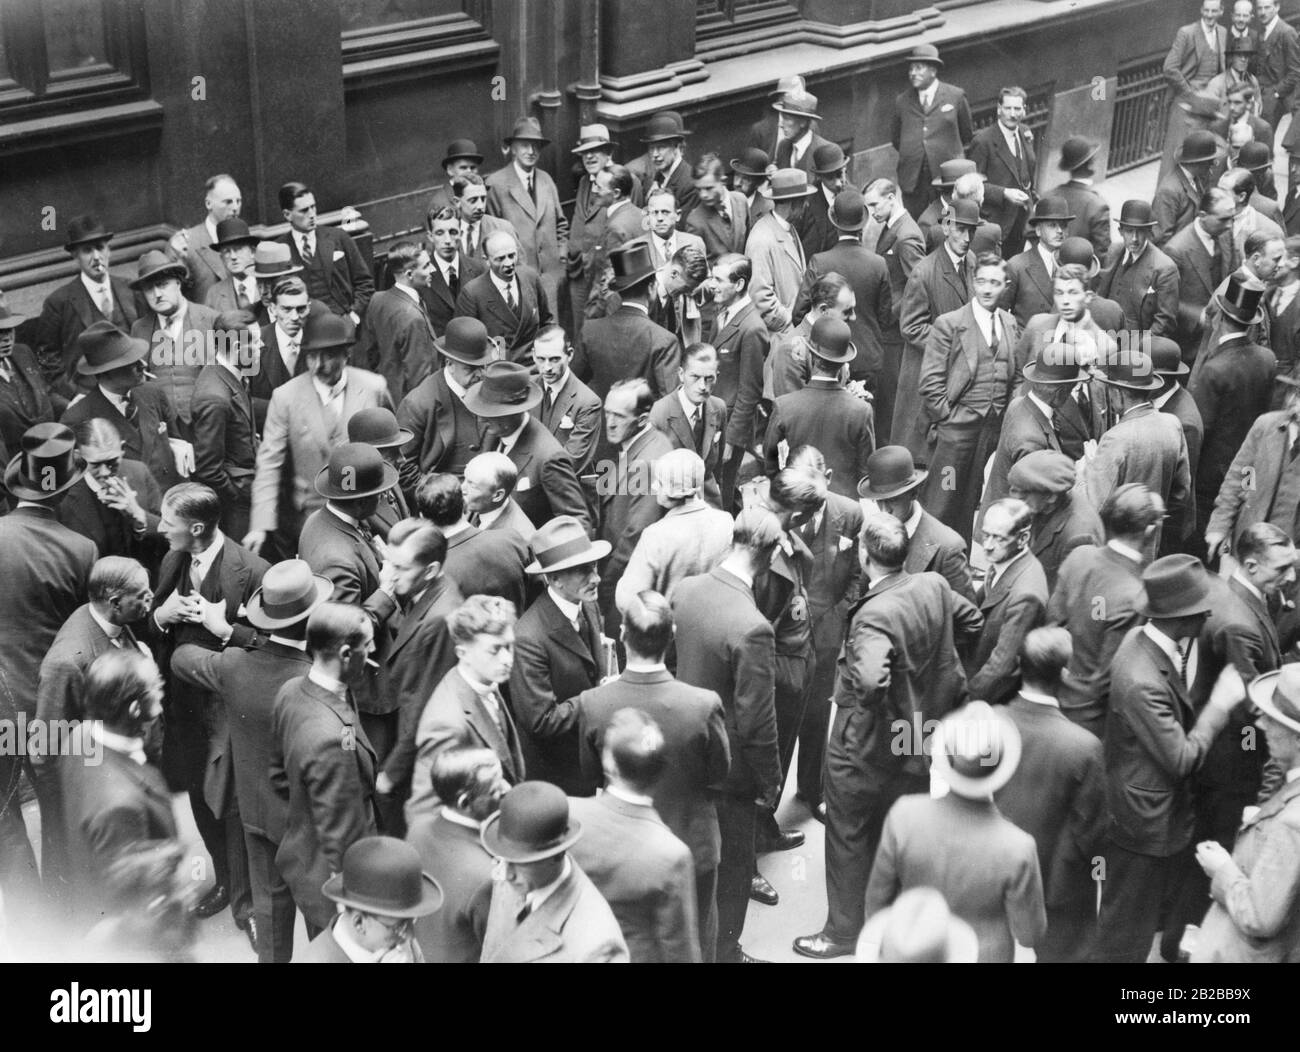 The Great Depression in Great Britain: People talking in front of the stock exchange about the Great Depression. Stock Photo